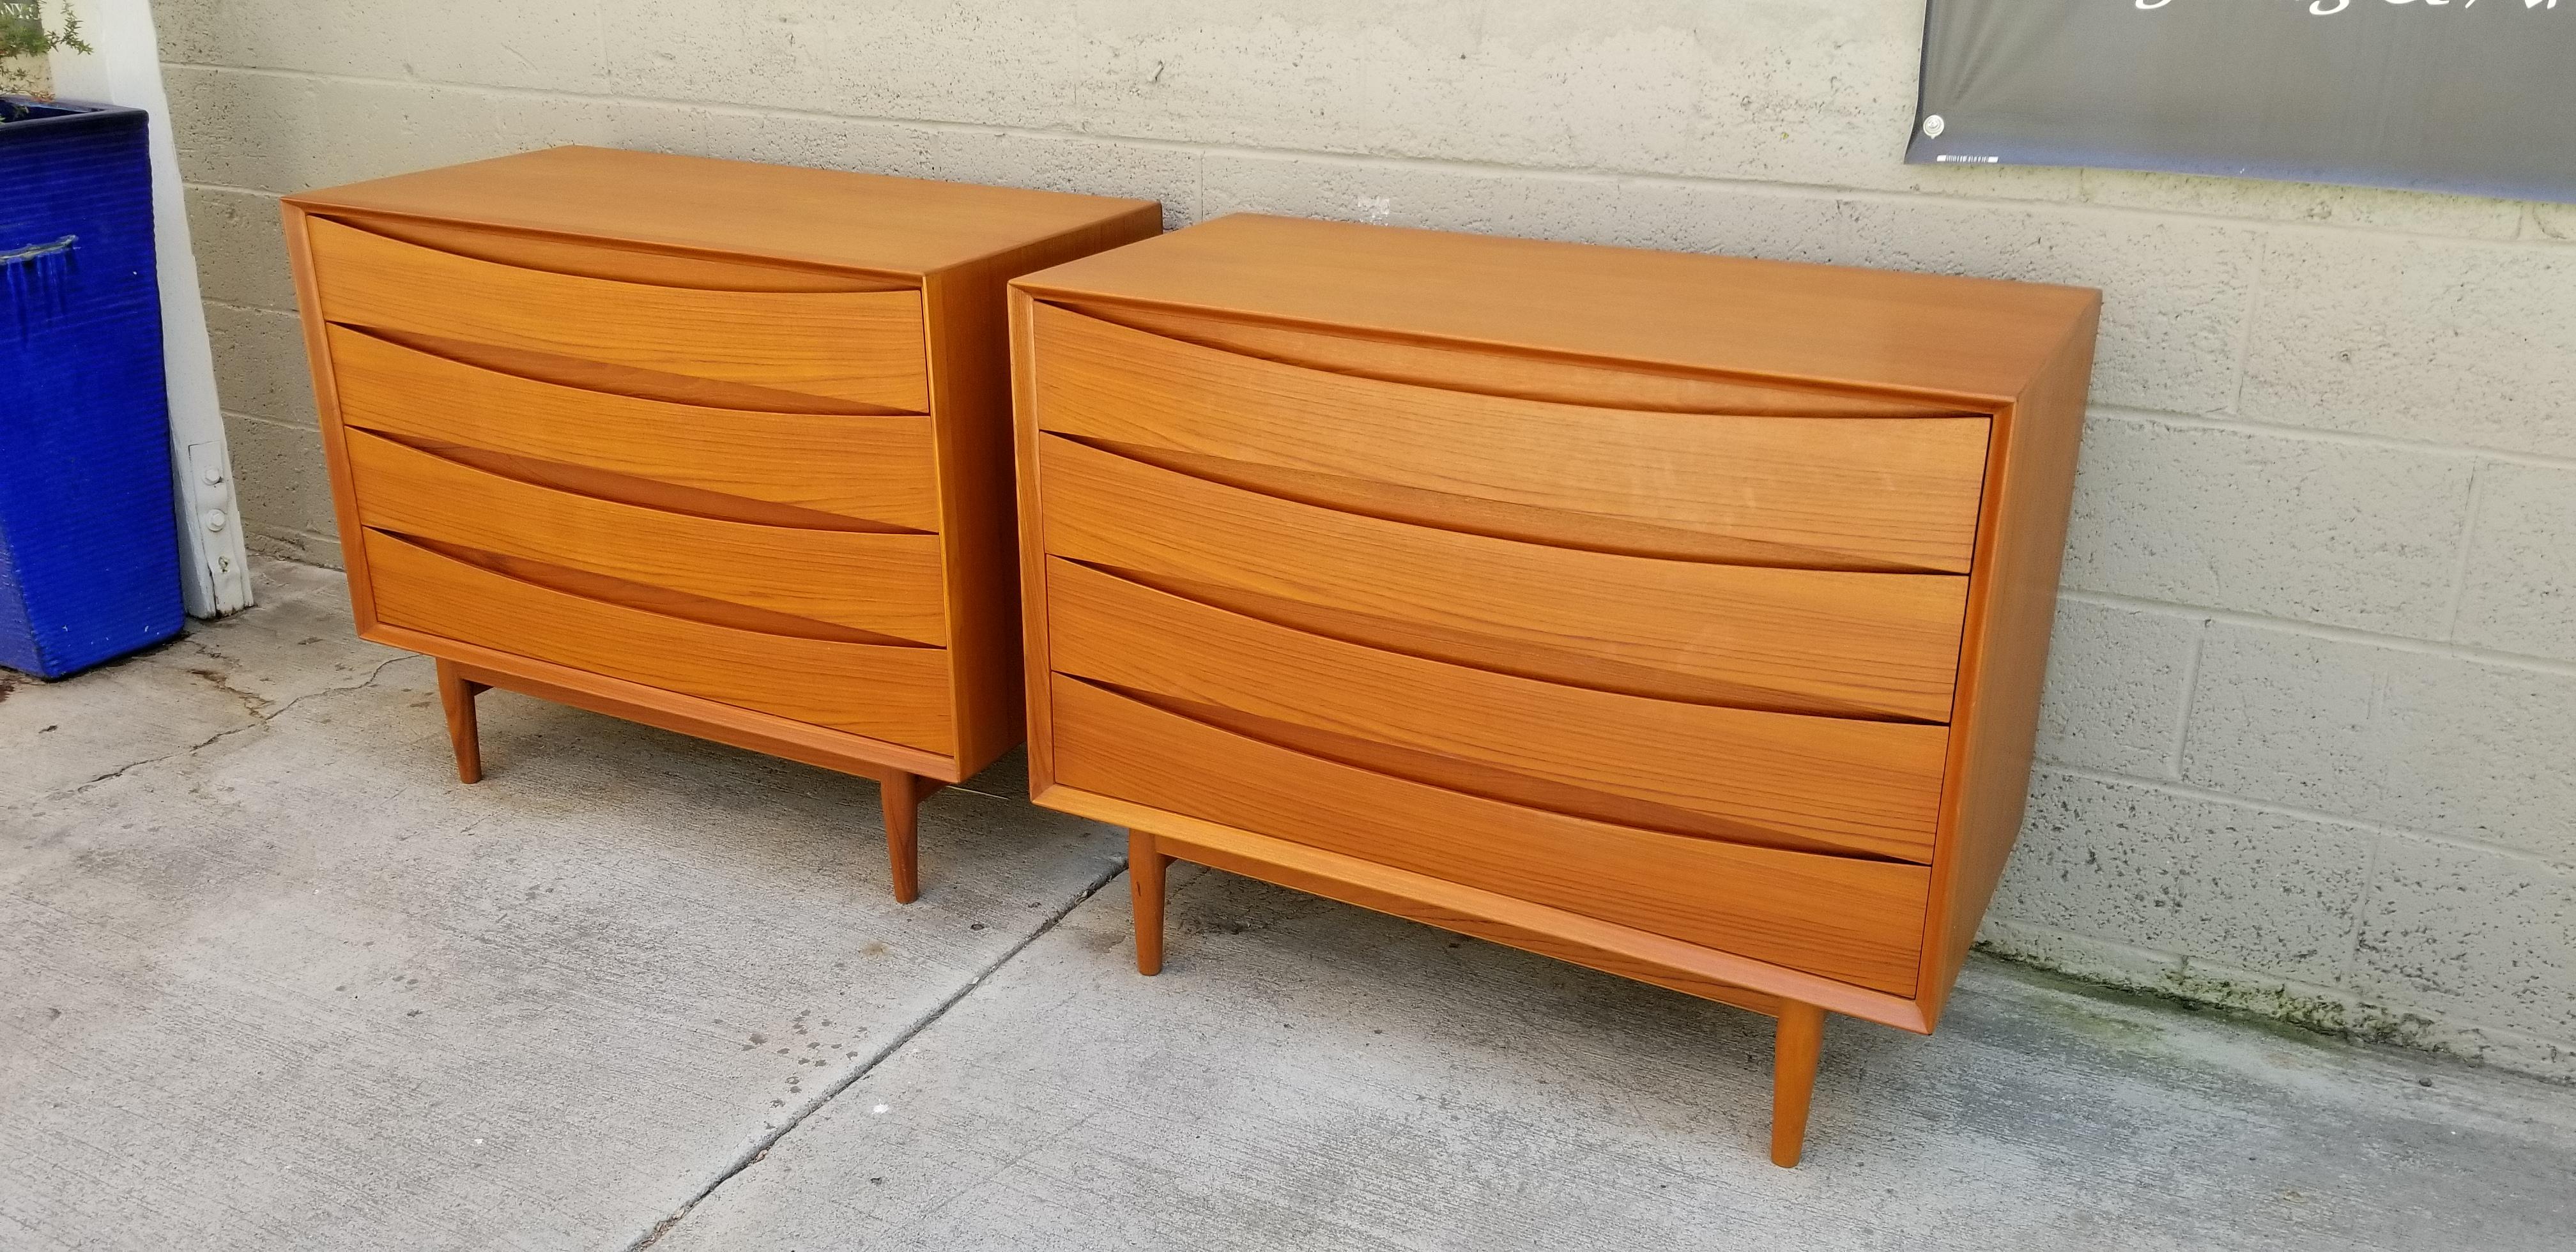 Pair of Teak Danish Modern Dressers by Arne Vodder for Sibast In Excellent Condition In Fulton, CA